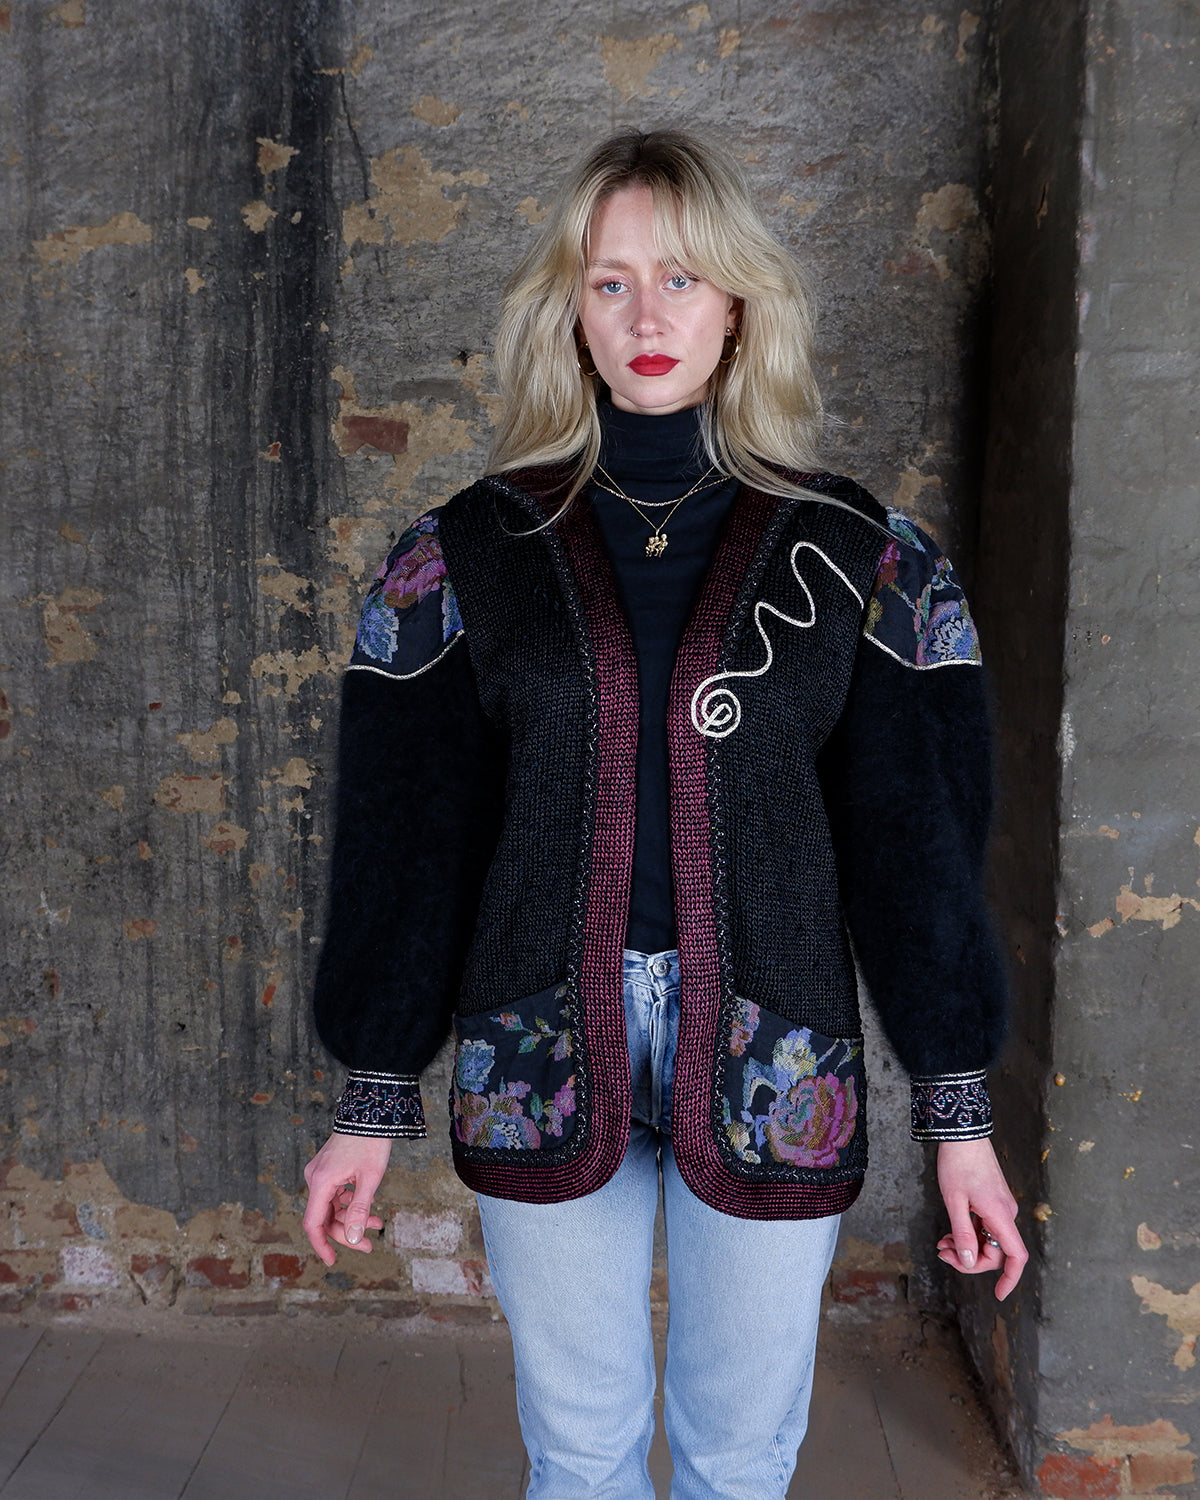 Wrap yourself in this Premium Vintage 80s black cardigan! This cozy cardigan features puffy shoulder parts, super soft and furry sleeves, two front pockets and a playful floral application.&nbsp;